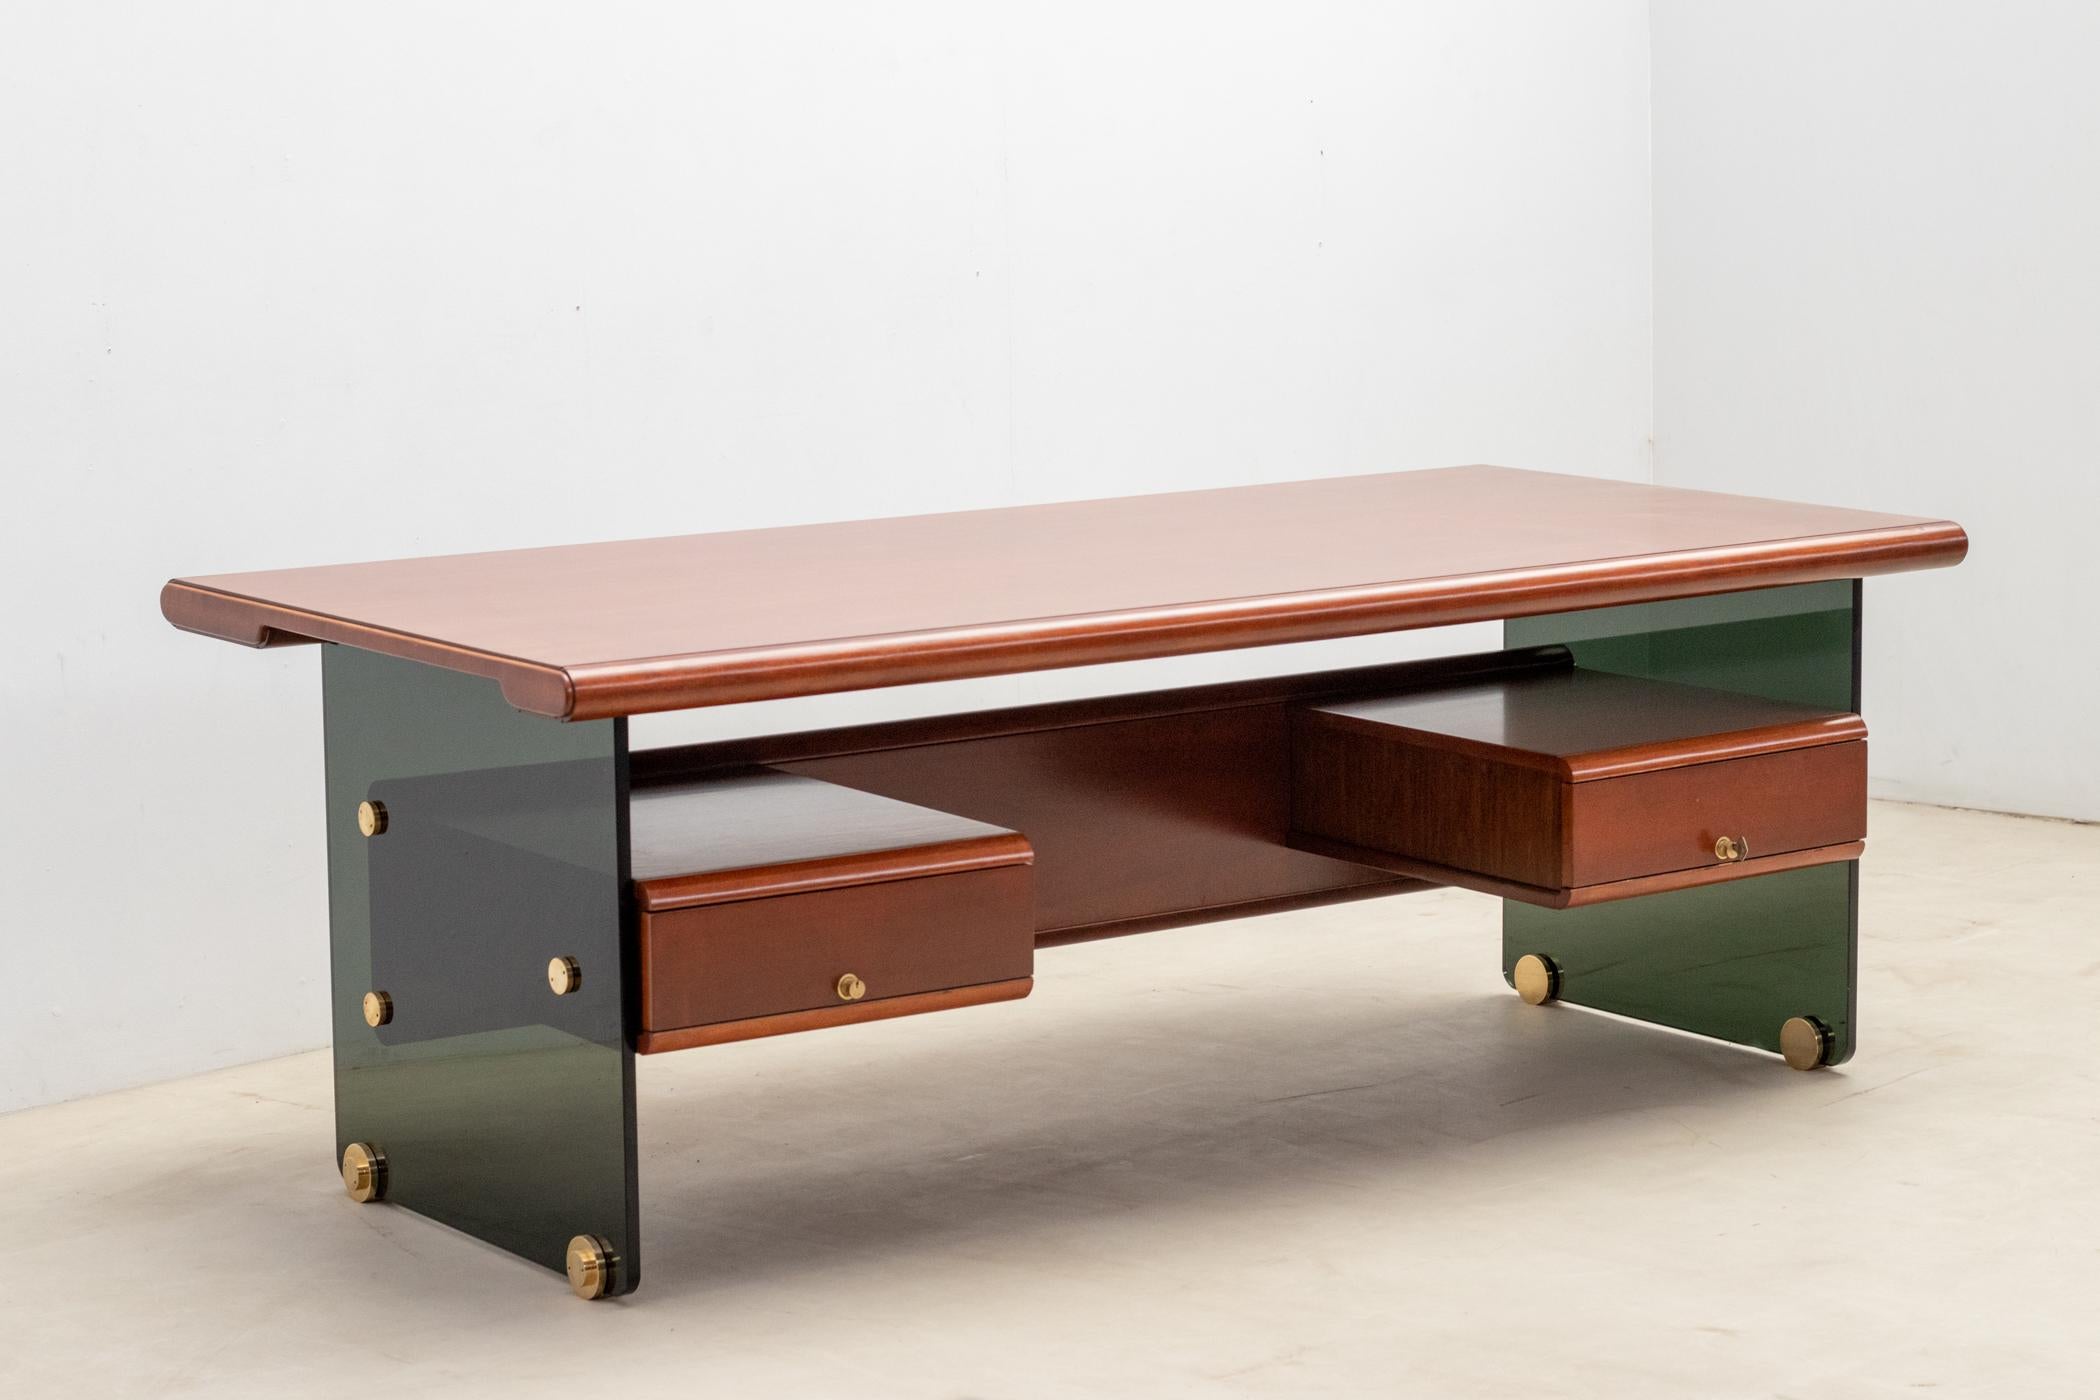 Italian Mid-Century Modern glass desk by Tosi, Italy 1960' For Sale